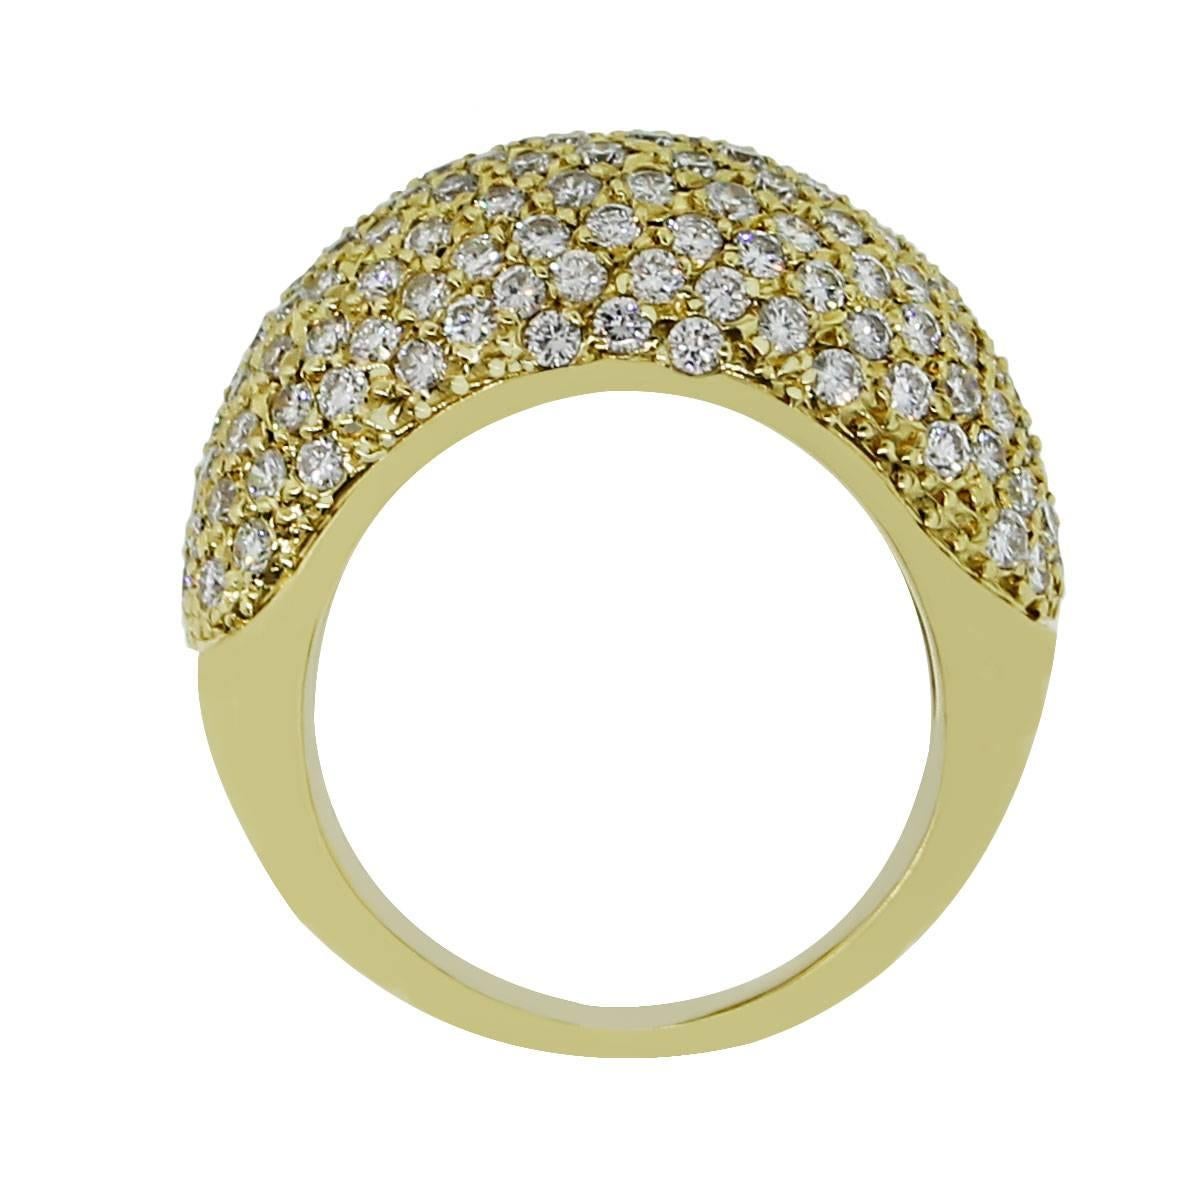 Material: 18k yellow gold
Diamond Details: Approximately 2.58ctw of round brilliant diamonds. Diamonds are G/H in color and VS in clarity
Ring Size: 6.5 (cannot be sized)
Ring Measurements: 0.90″ x 0.55″ x 1.10″
Total Weight: 13.8g (8.9dwt)
SKU: